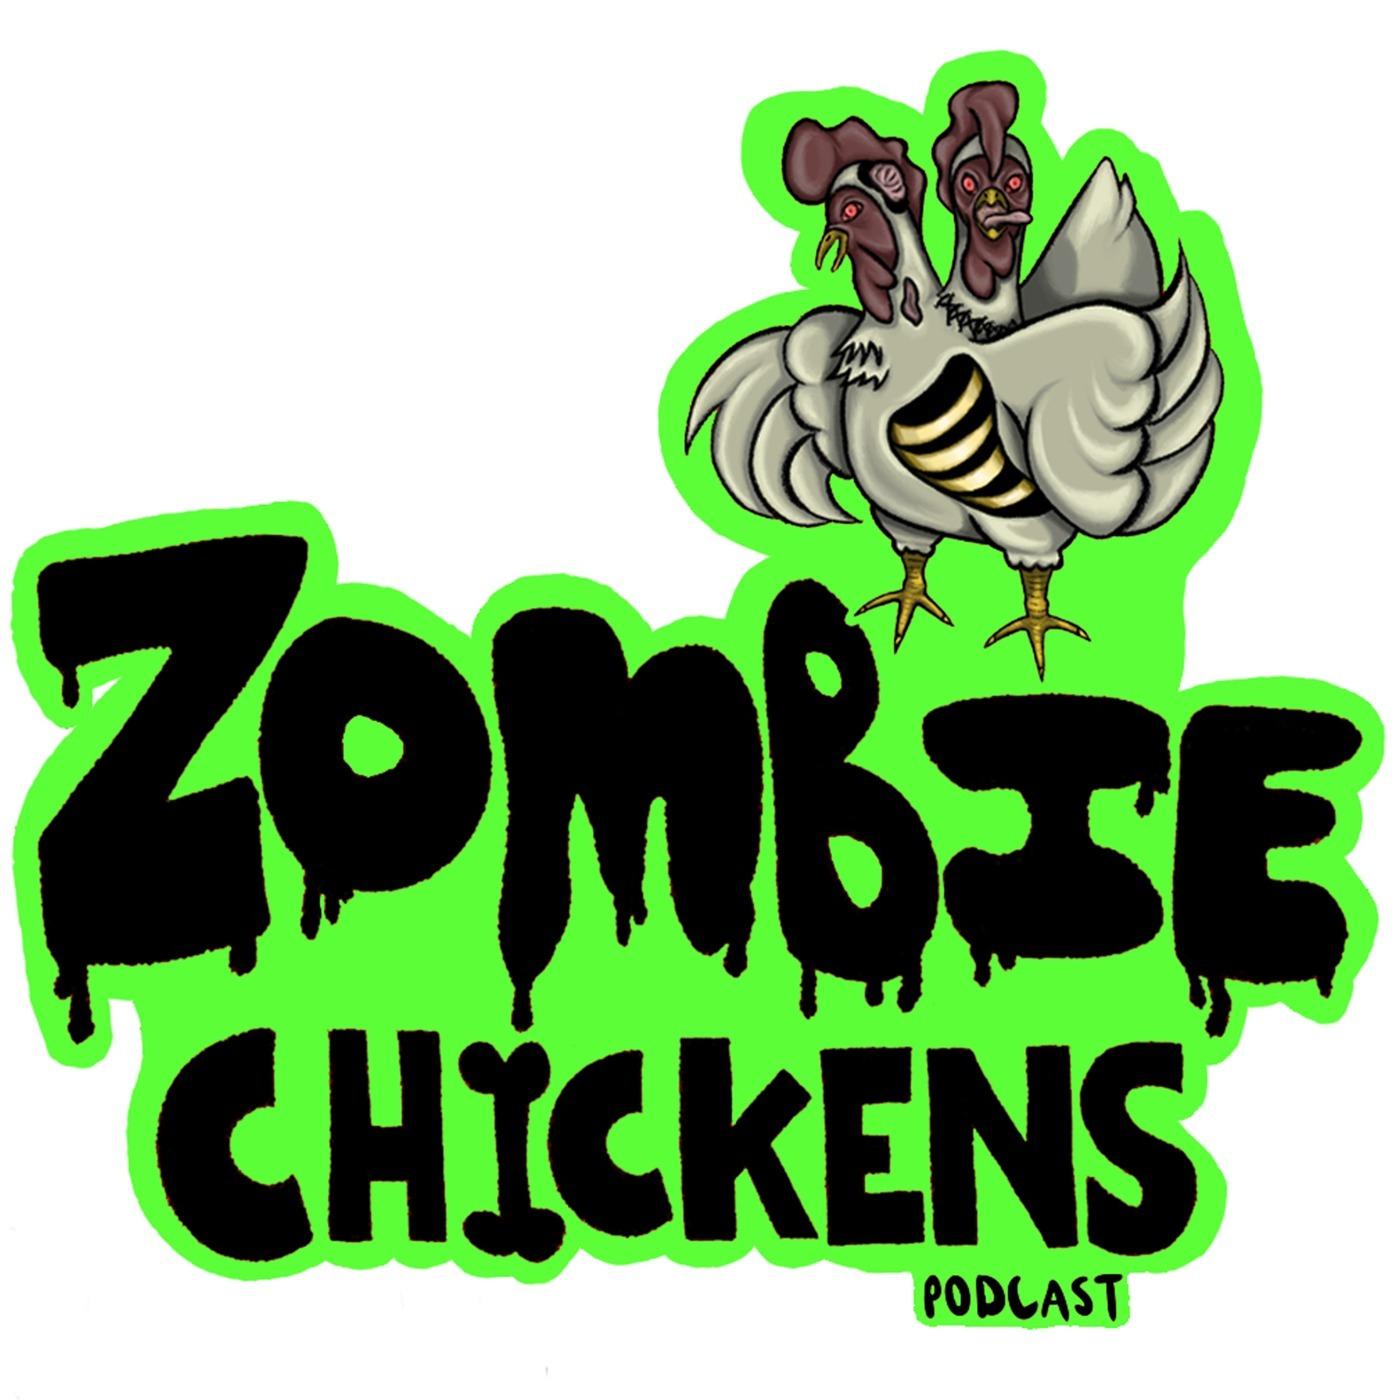 Zombie Chickens Podcast